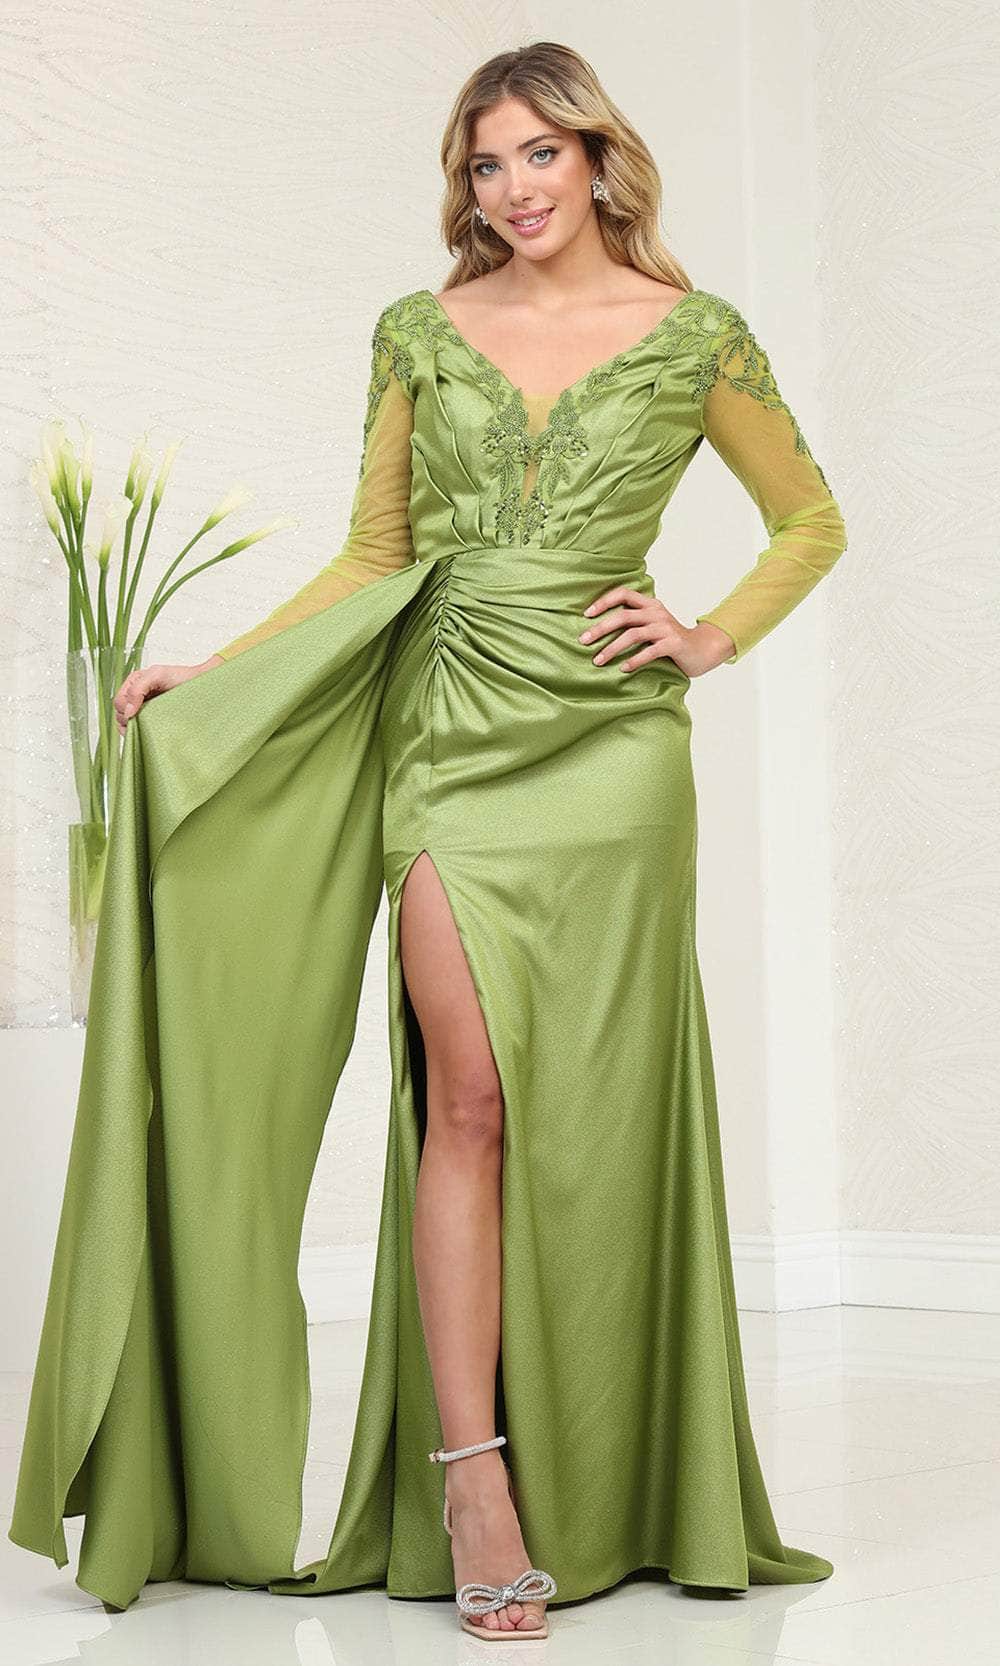 May Queen RQ8045 - Plunging V-Back Prom Gown Prom Dresses 4 / Olive